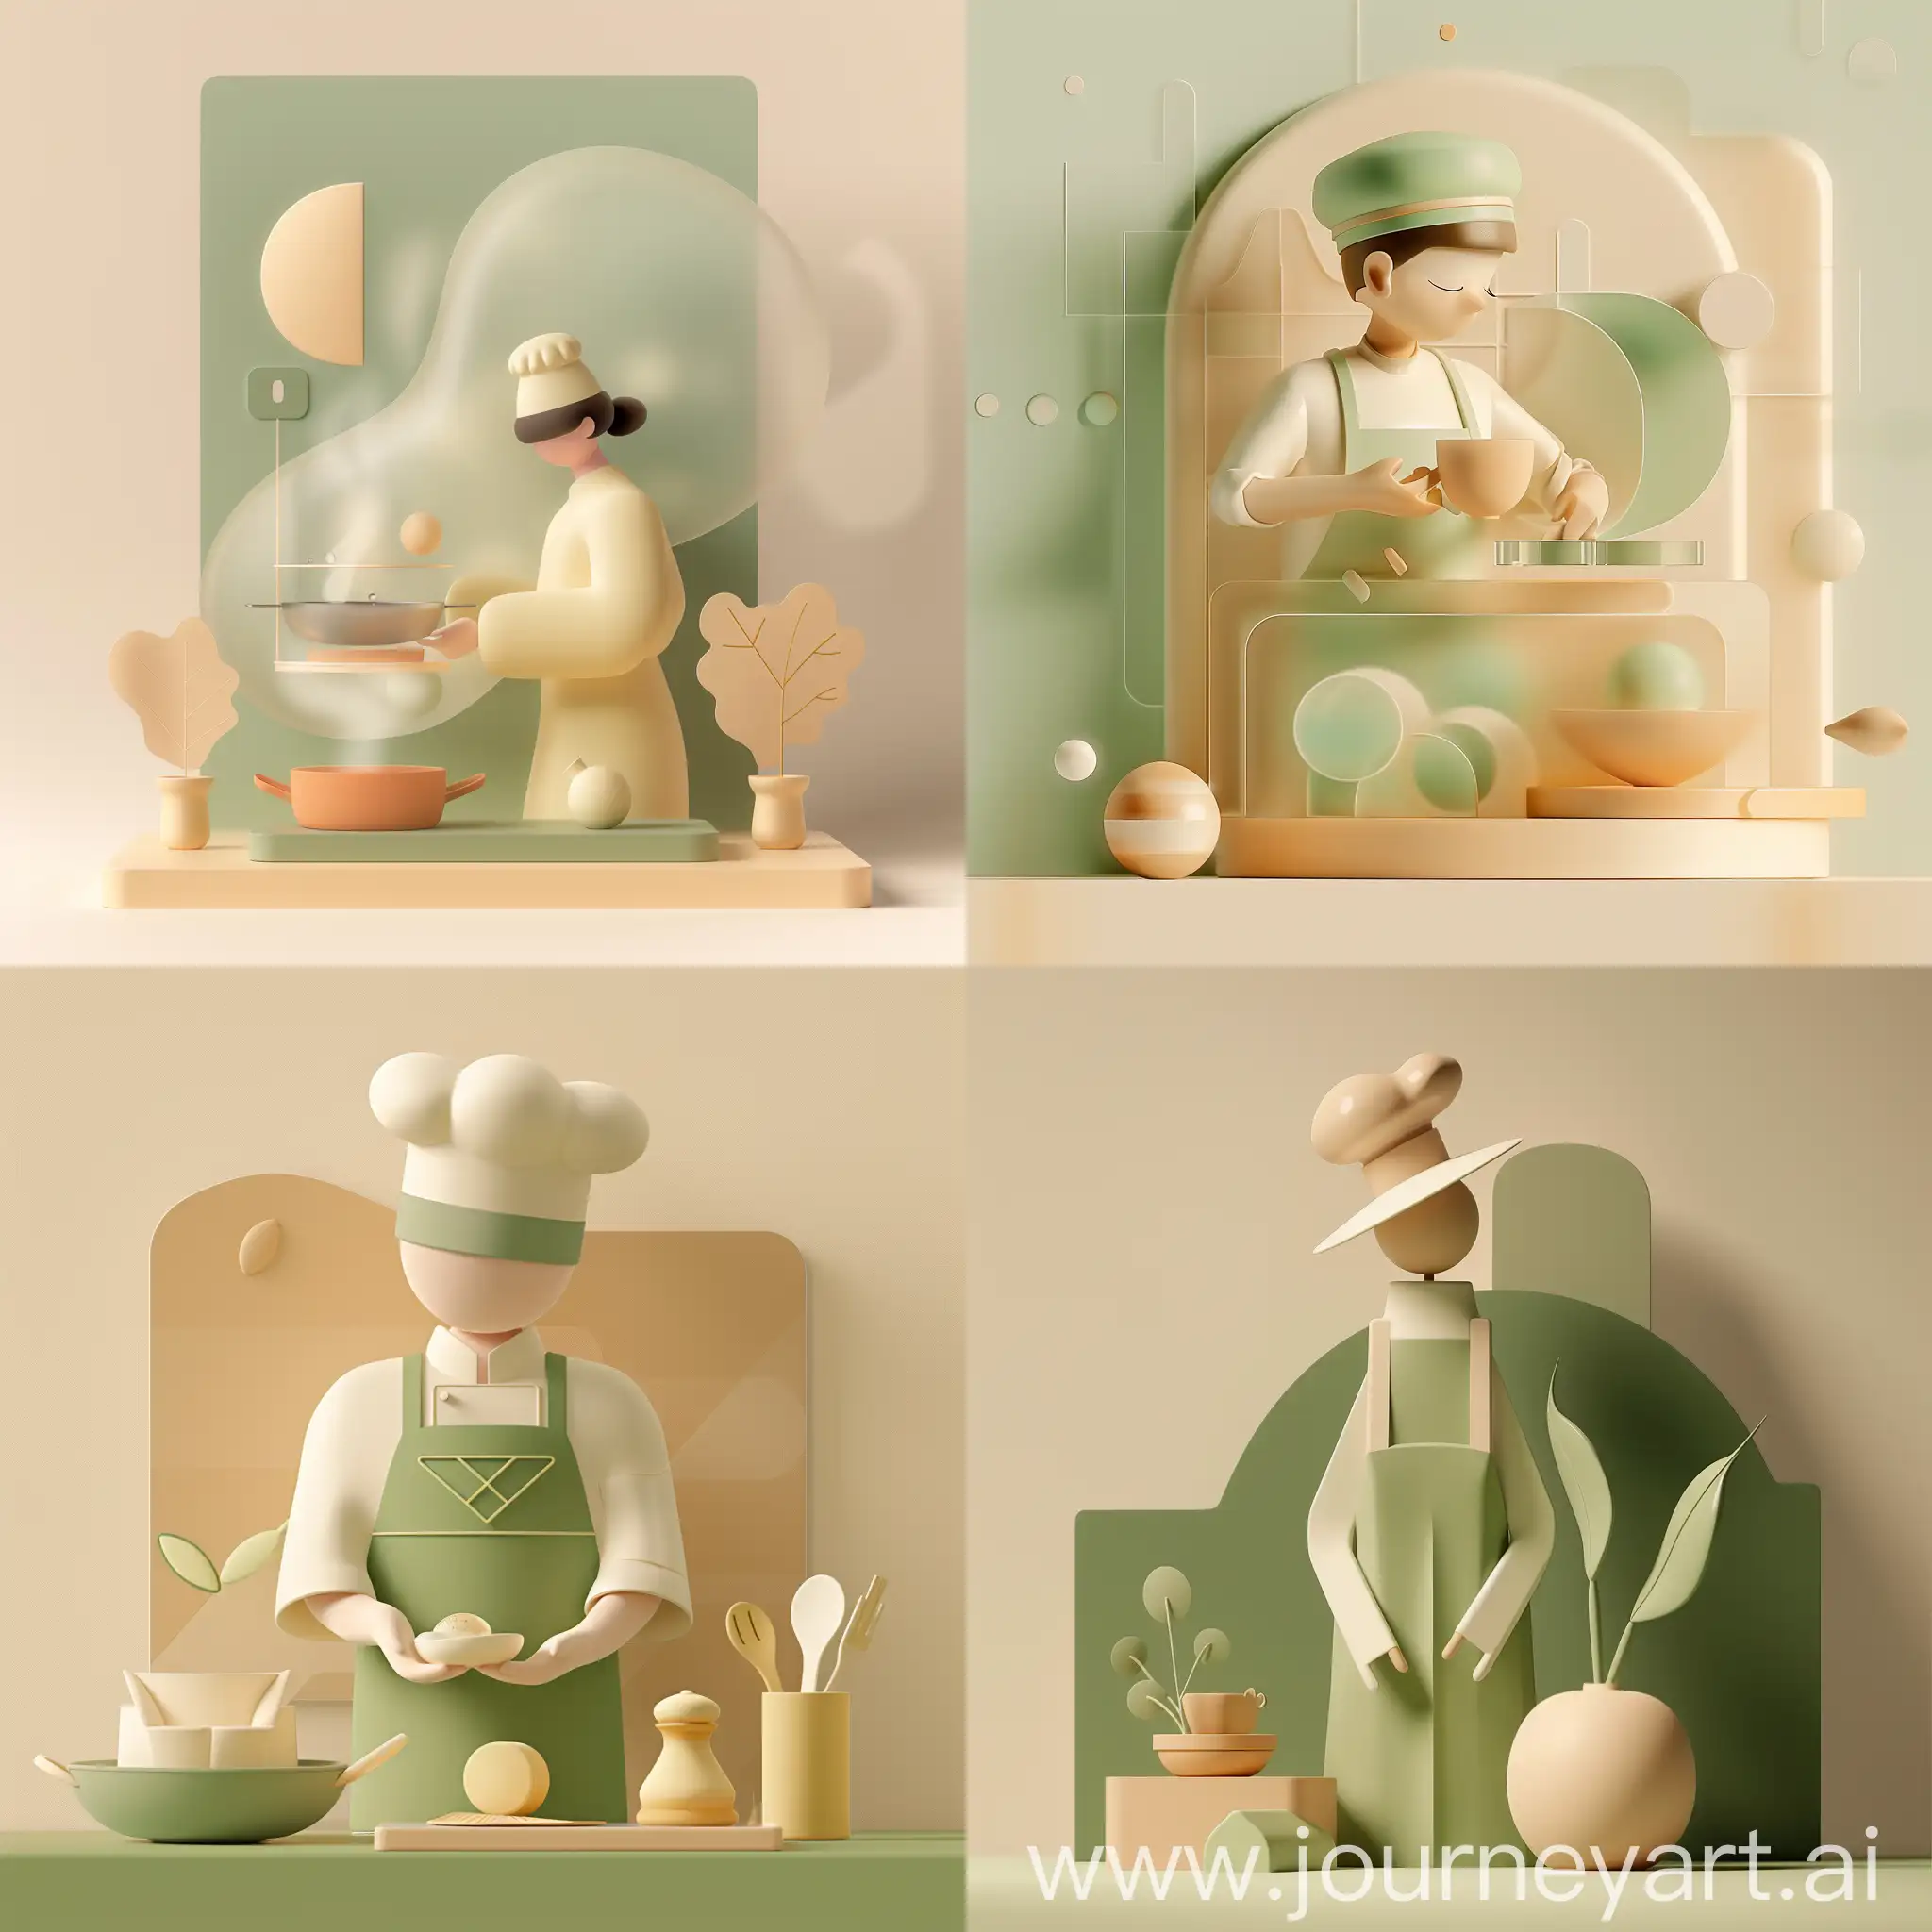 simple 3D ui illustration of a cooking student, in the style of soft lines and shapes.abstract.minimalism. gradient color, green and beige theme, transparent texture, website header.